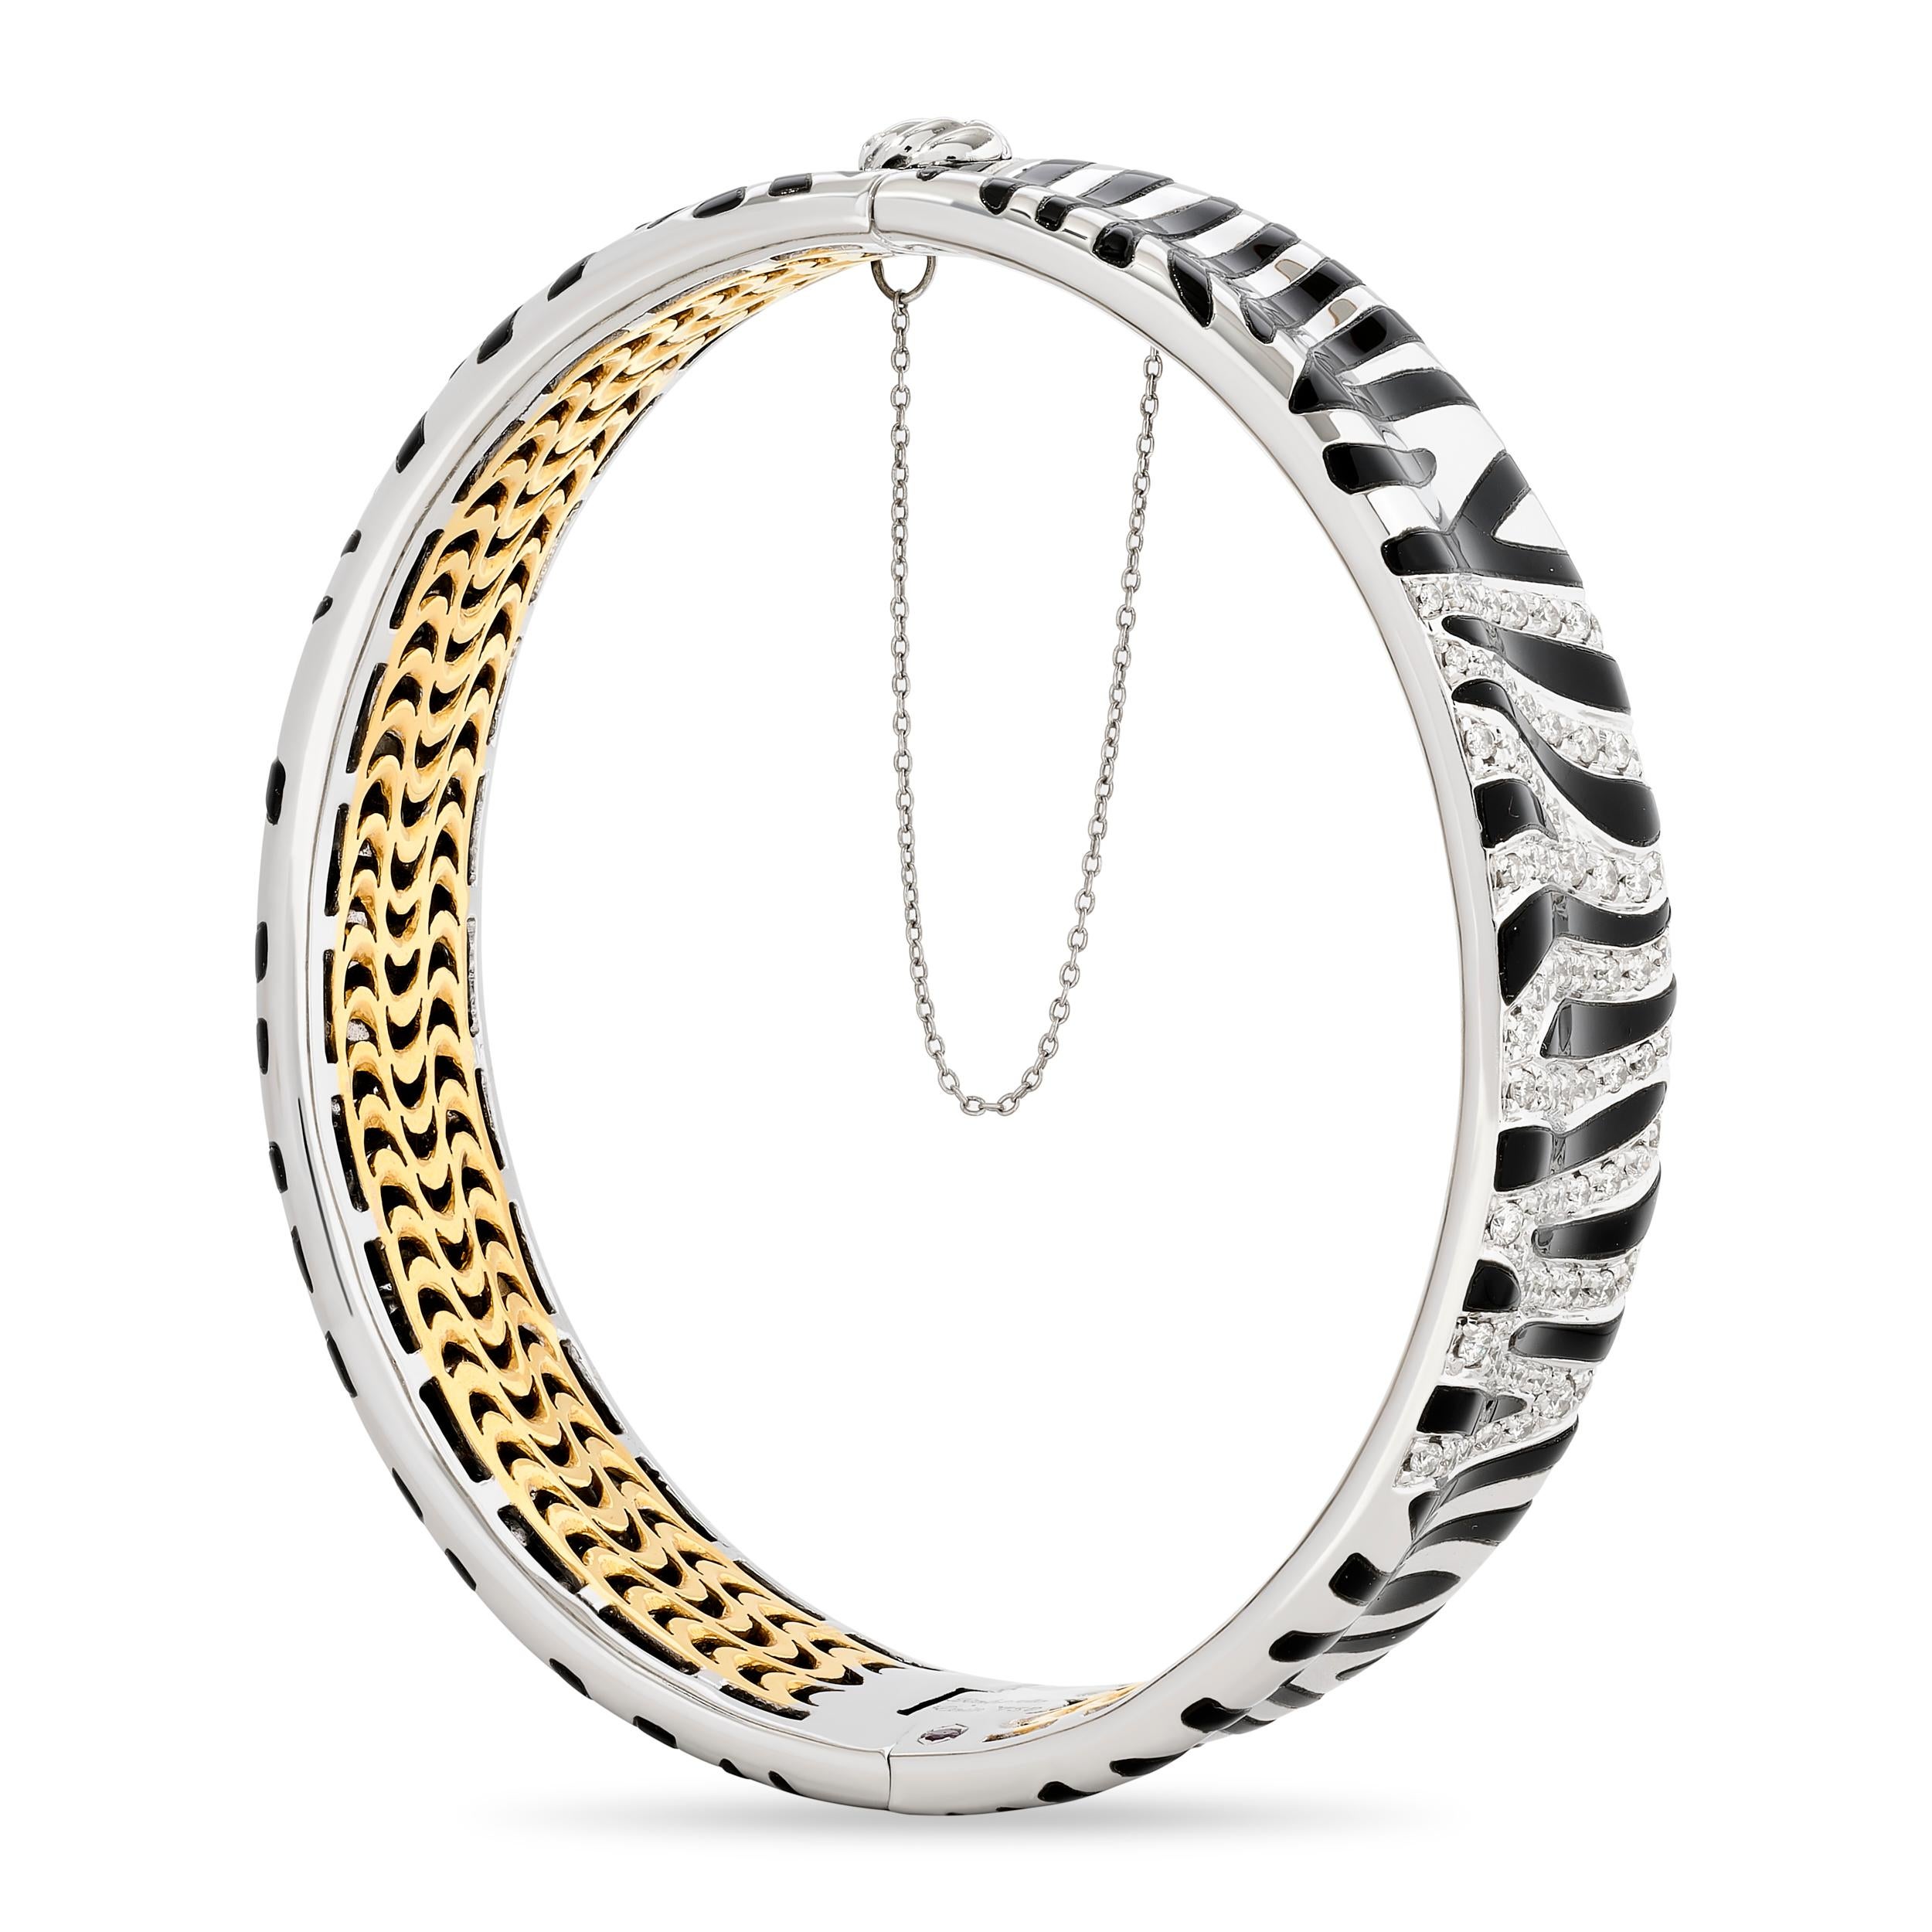 Embrace the wild elegance with this Roberto Coin zebra stripe bangle.

Made in 18 karat two tone - yellow and white gold. 
This bracelet contains approximately 0.85 carats of round brilliant cut diamonds with G, H, I color and SI clarity.  It